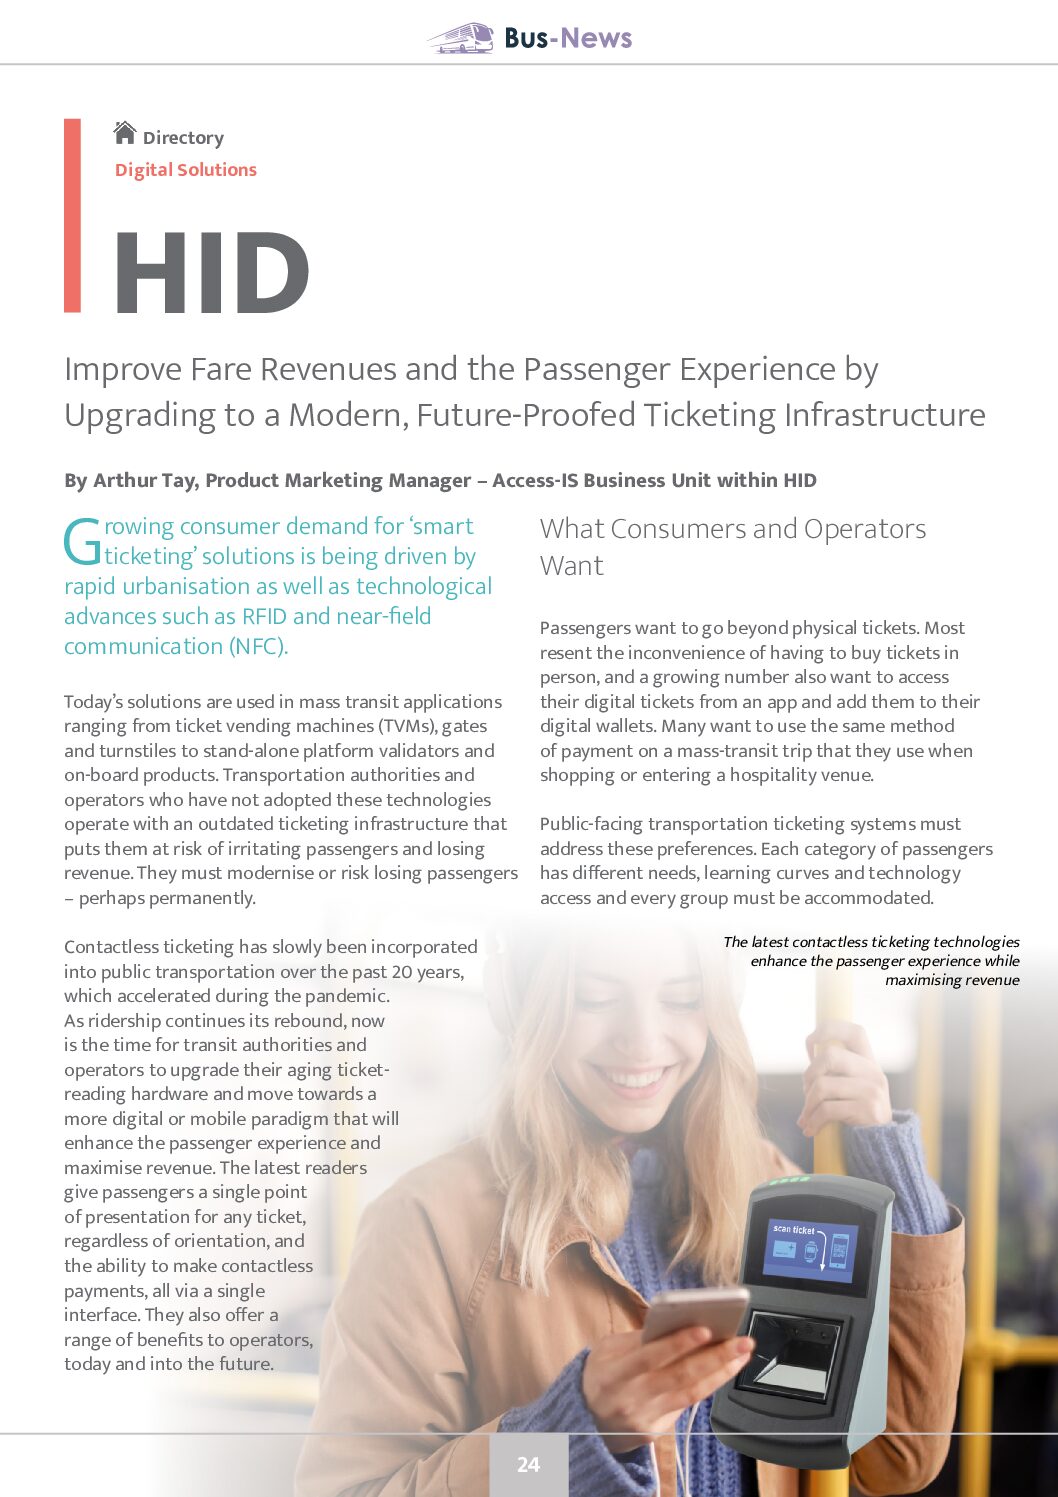 Improve Fare Revenues by Upgrading to a Modern Ticketing Infrastructure